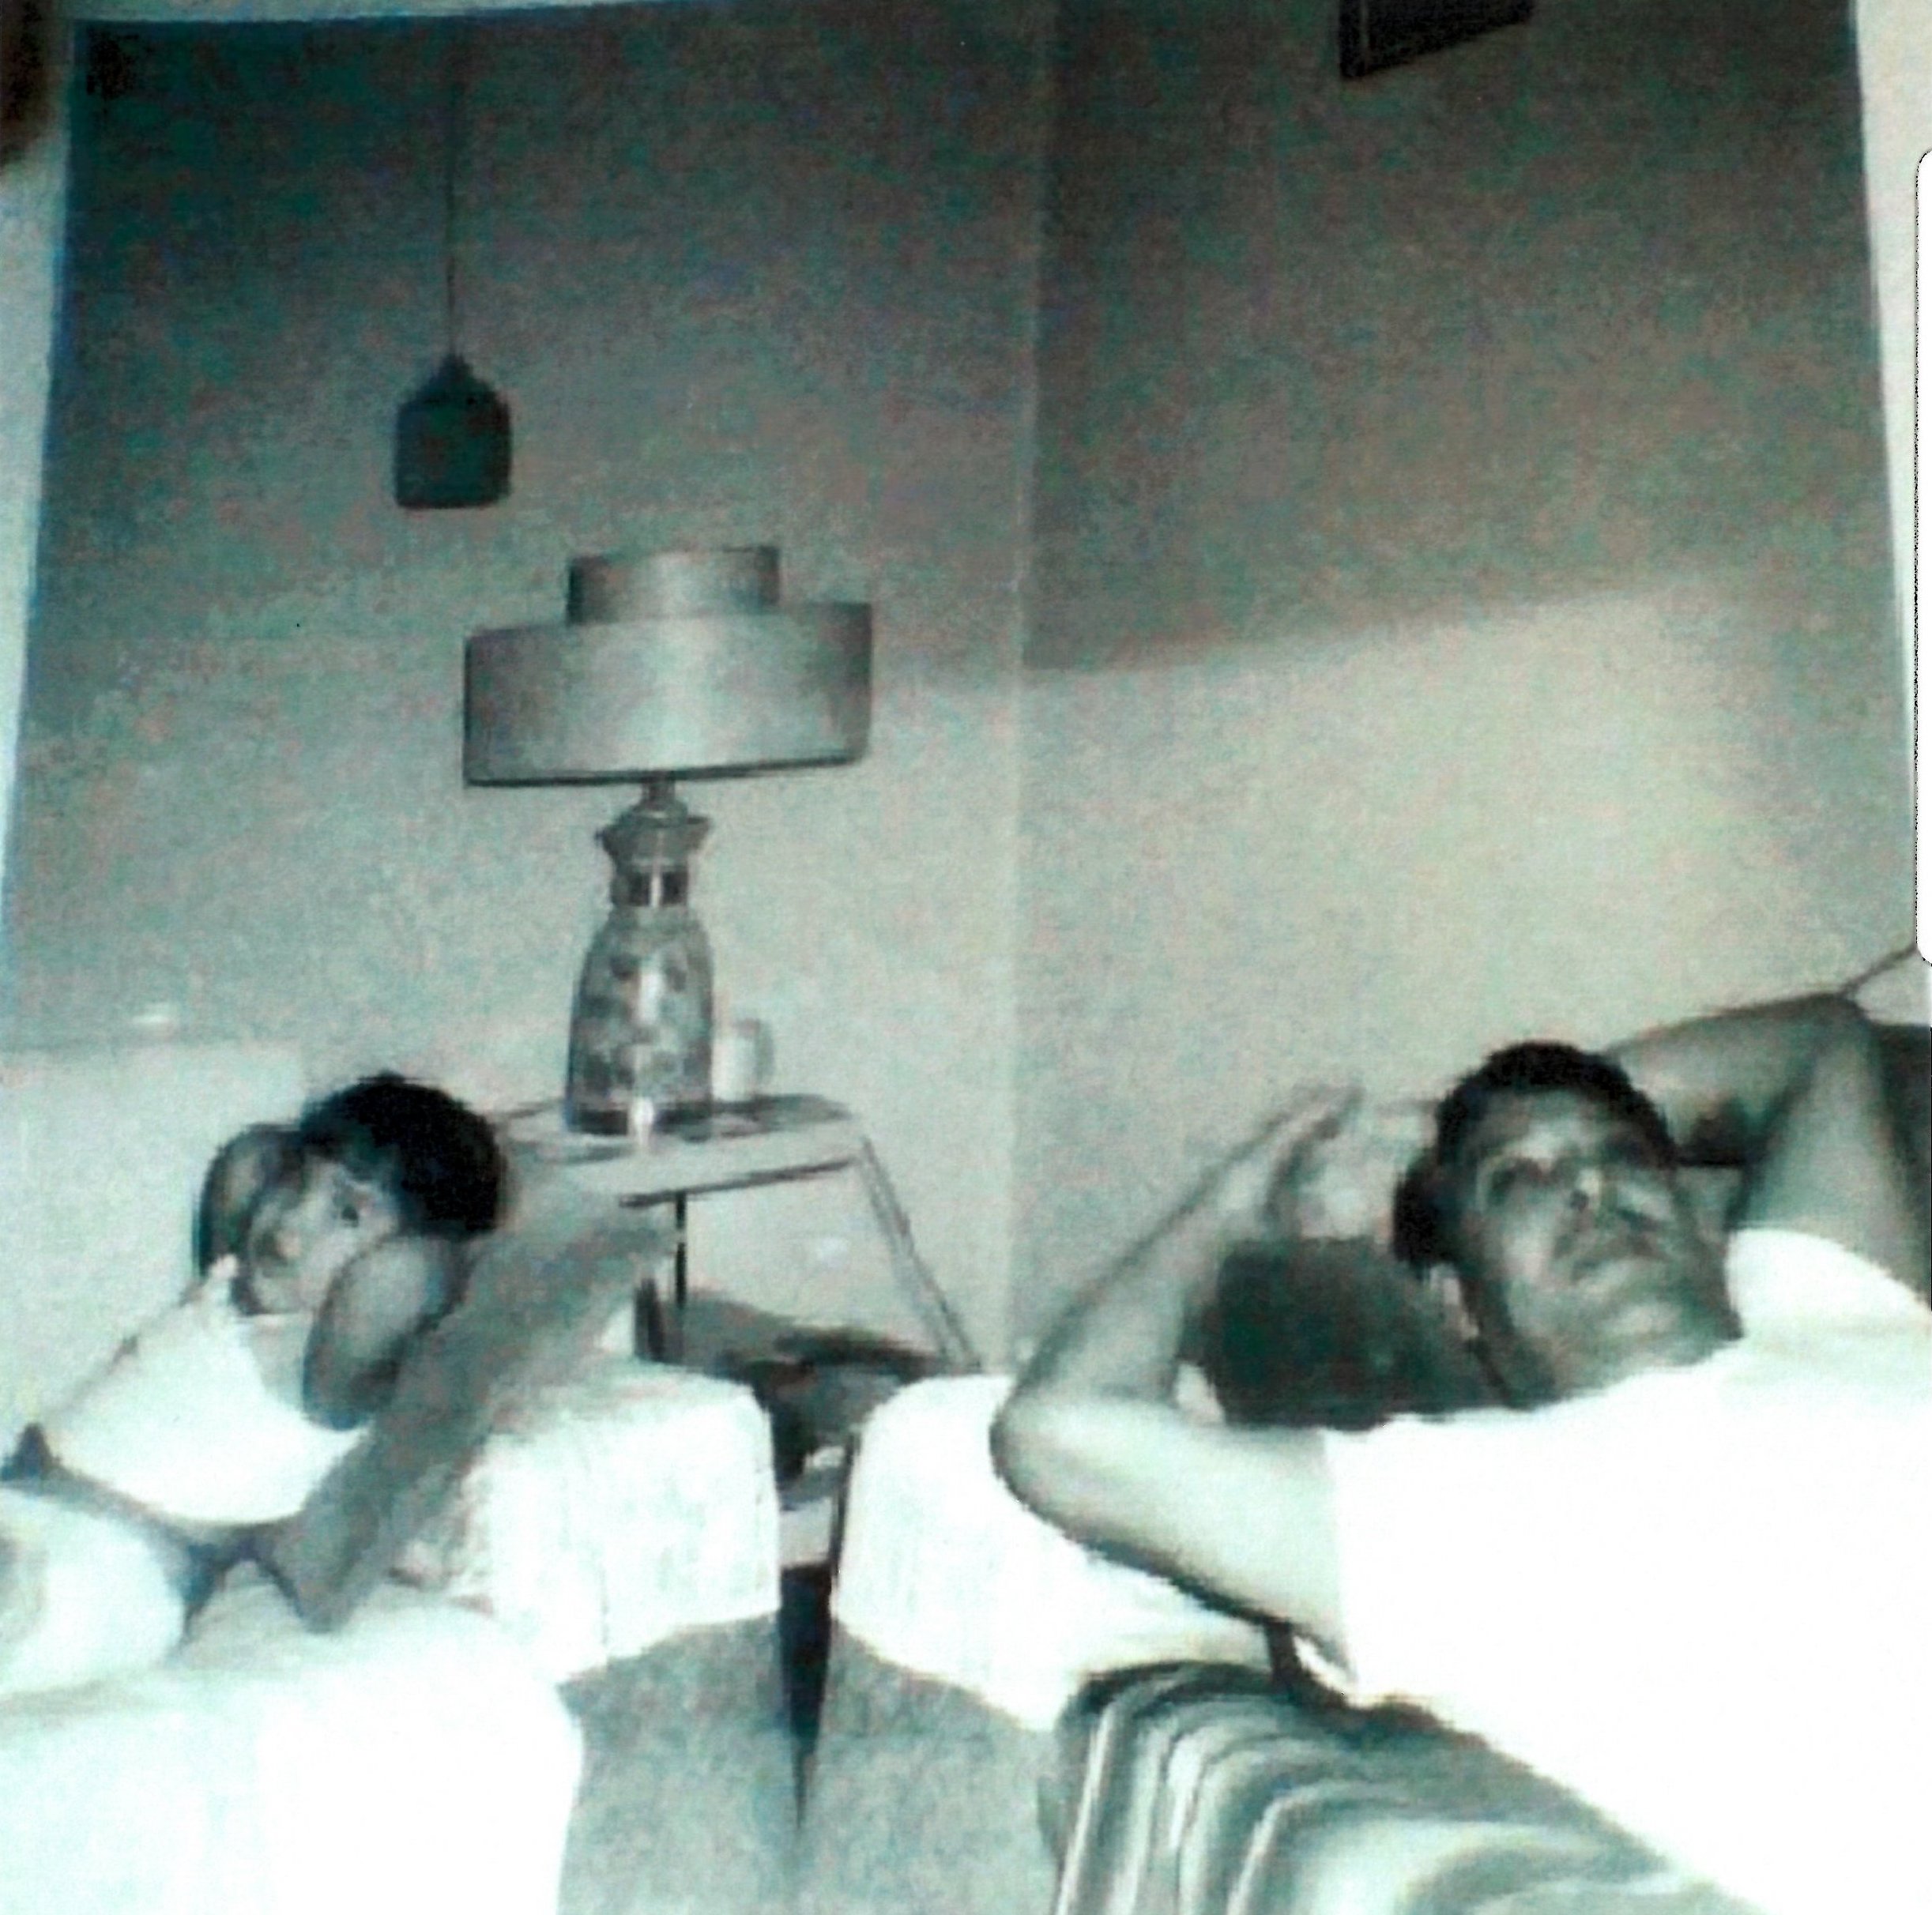 Marianne Diaz and her father on opposite sofas. Marianne Diaz adored her father and wanted to emulate him, even at a young age.